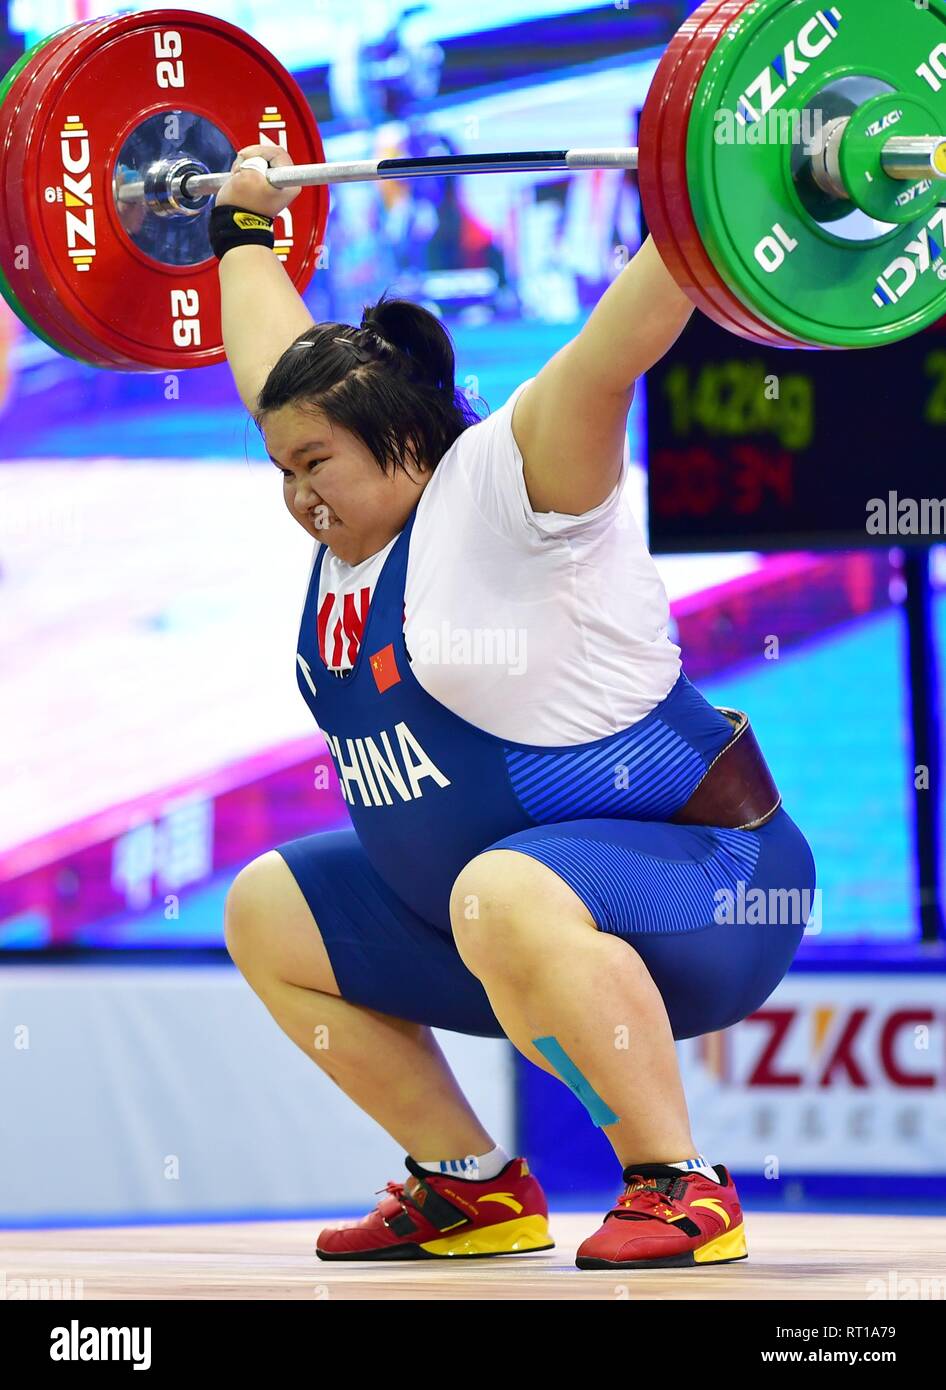 Fuzhou China S Fujian Province 27th Feb 2019 Li Wenwen Of China Competes During The Women S Weightlifting 87kg Event At 2019 Iwf World Cup Qualification Event For 2020 Tokyo Olympic Games In